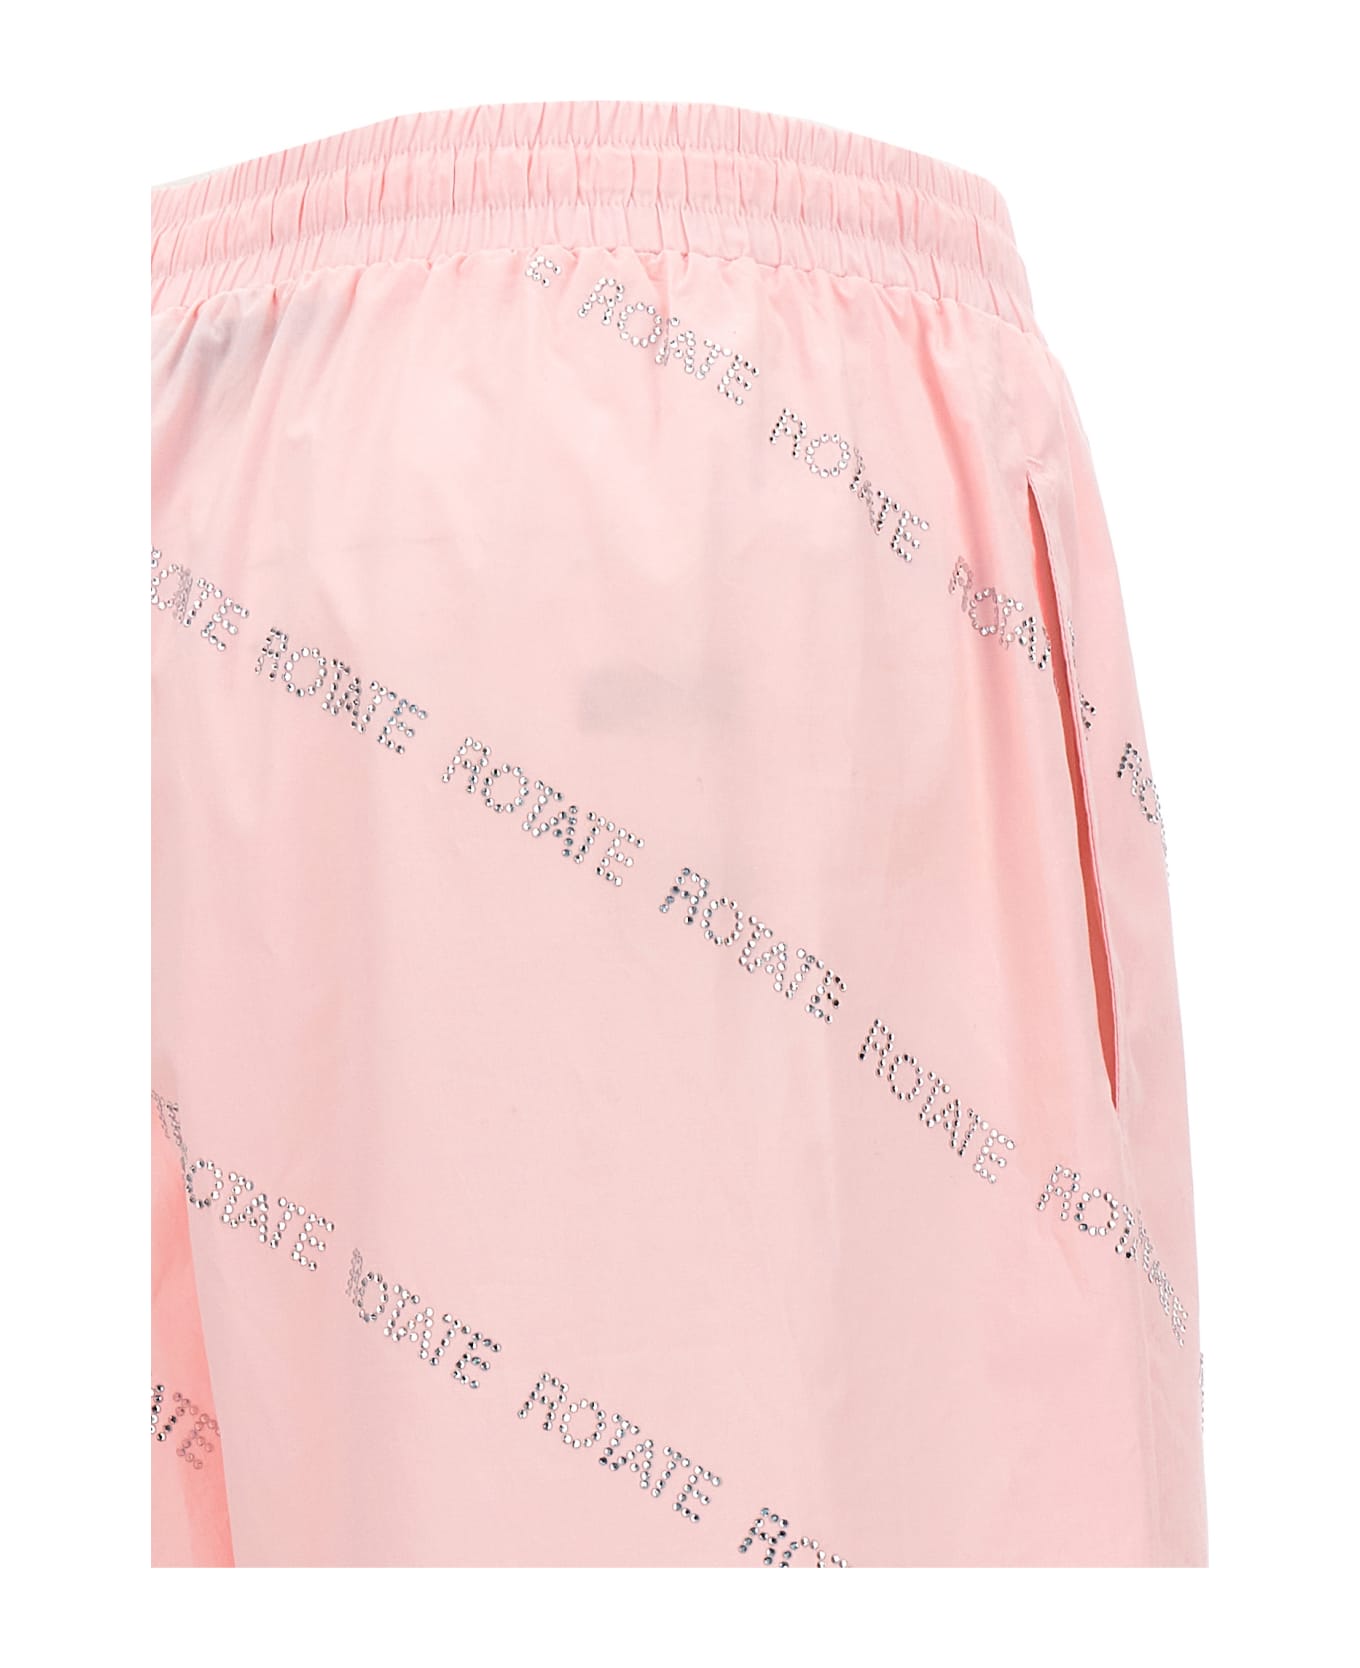 Rotate by Birger Christensen Sunday Capsule Crystal Pants - Pink